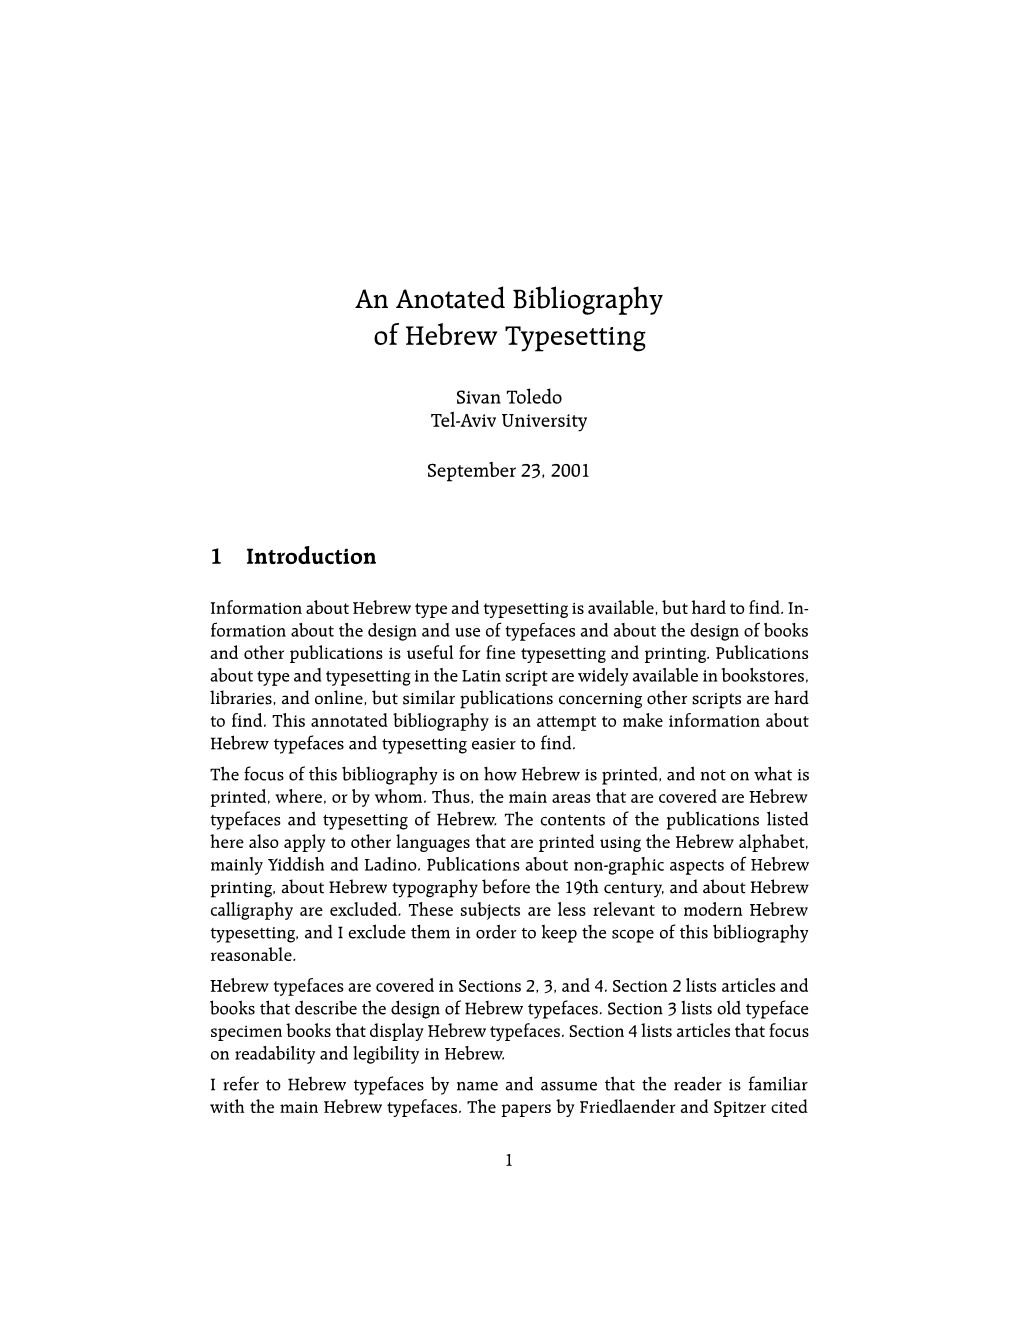 An Anotated Bibliography of Hebrew Typesetting